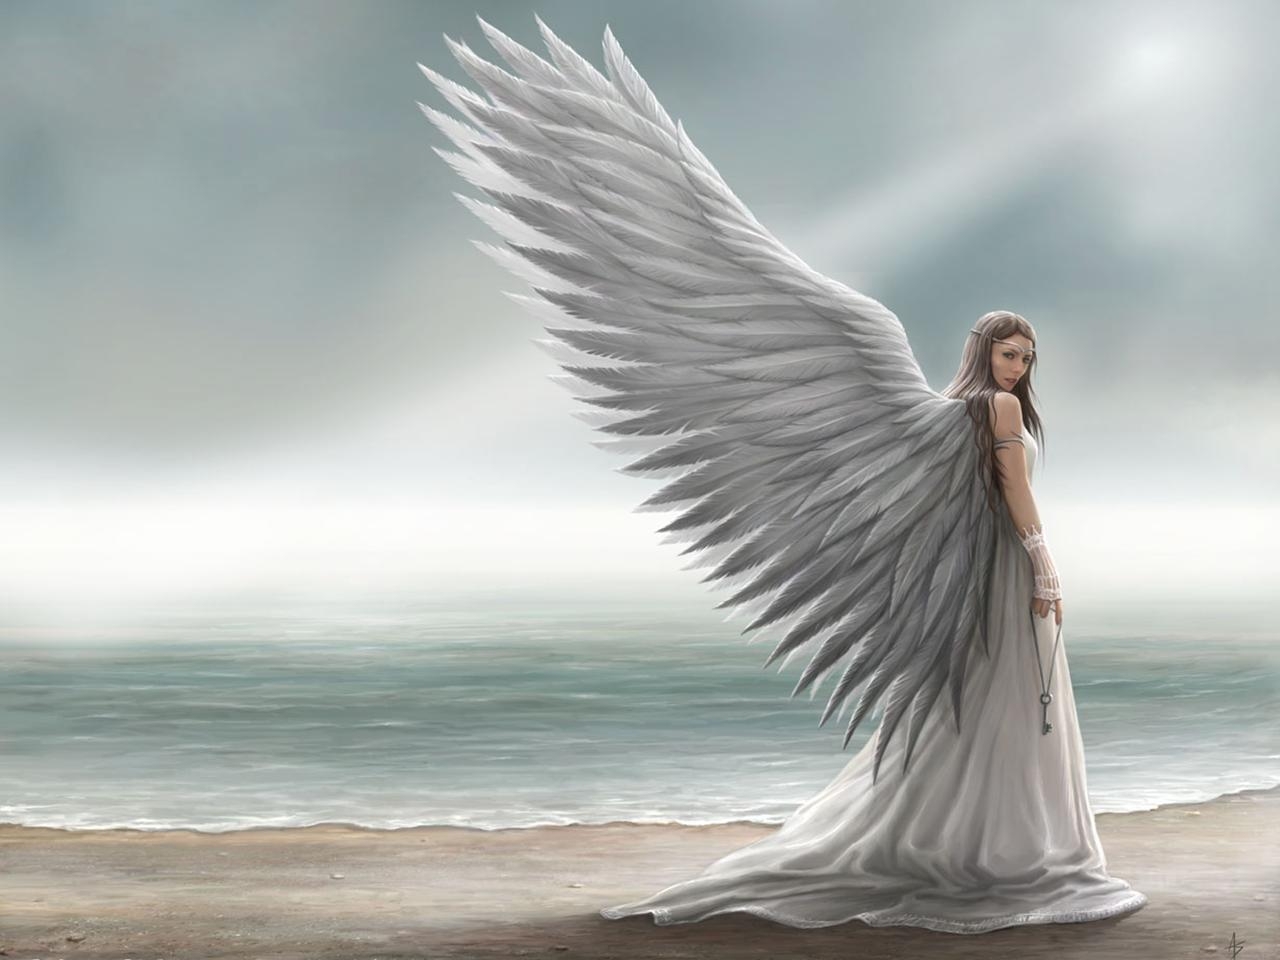 Popular Angels images for mobile phone